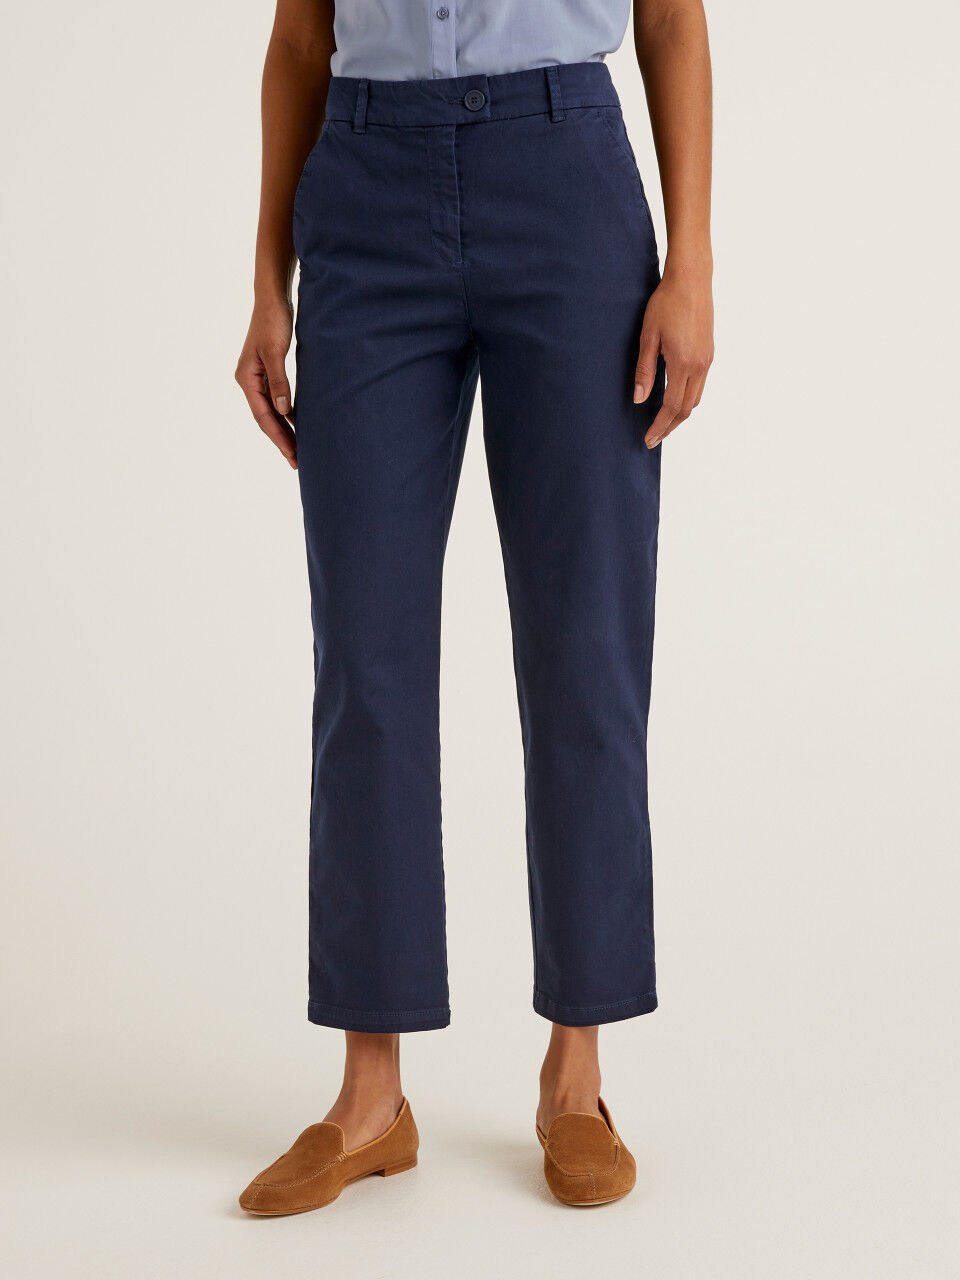 Women's Chino Trousers from Crew Clothing Company